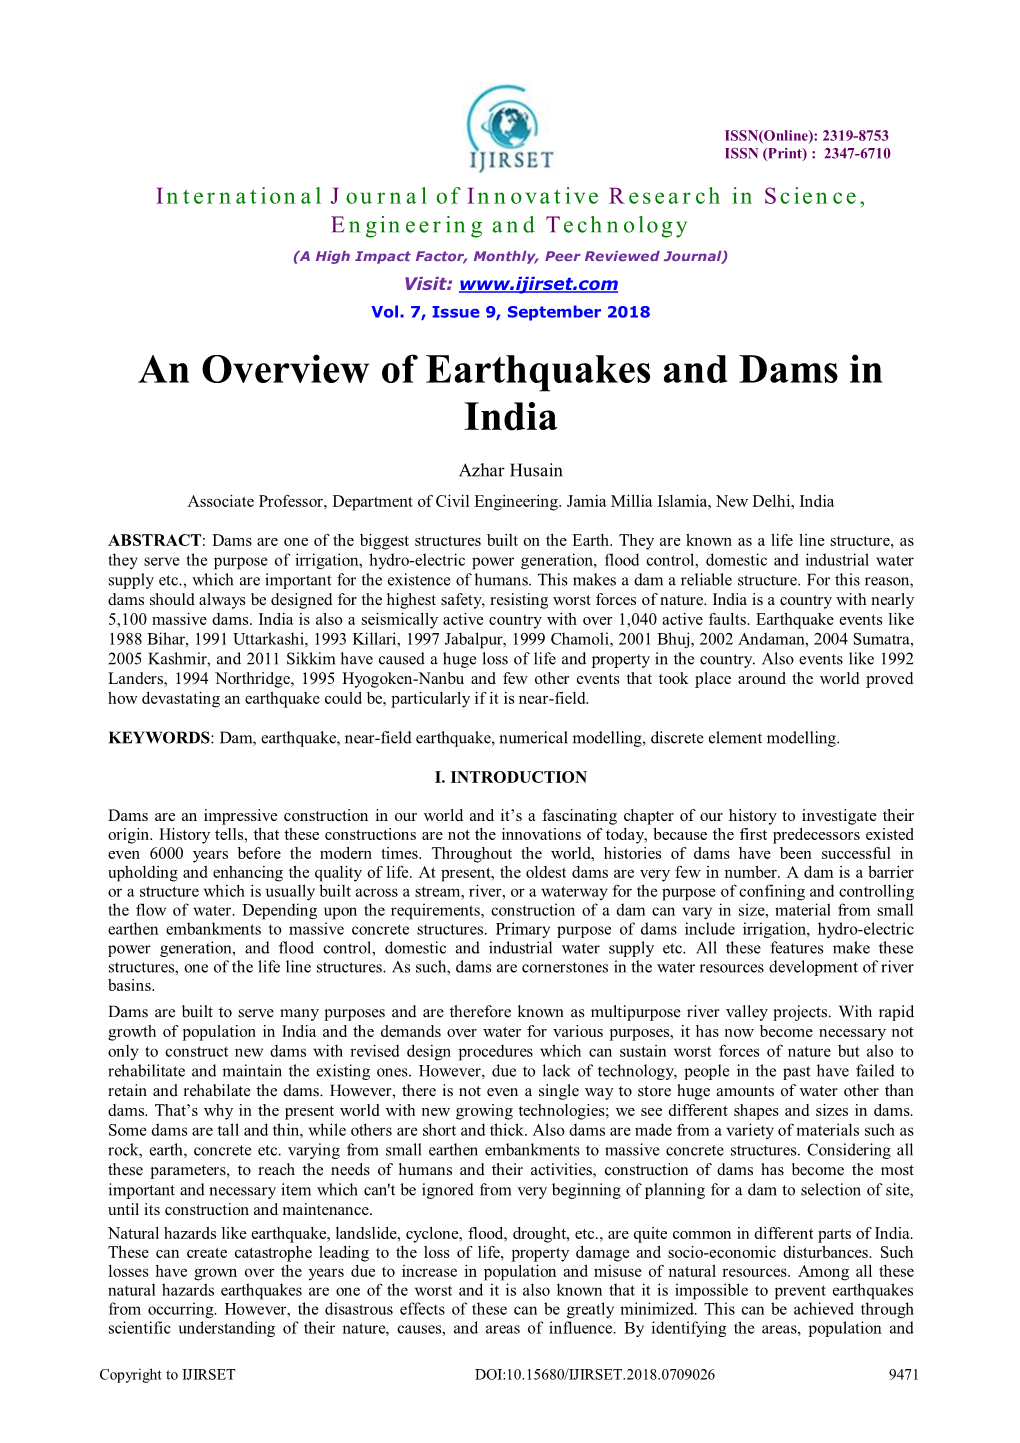 An Overview of Earthquakes and Dams in India